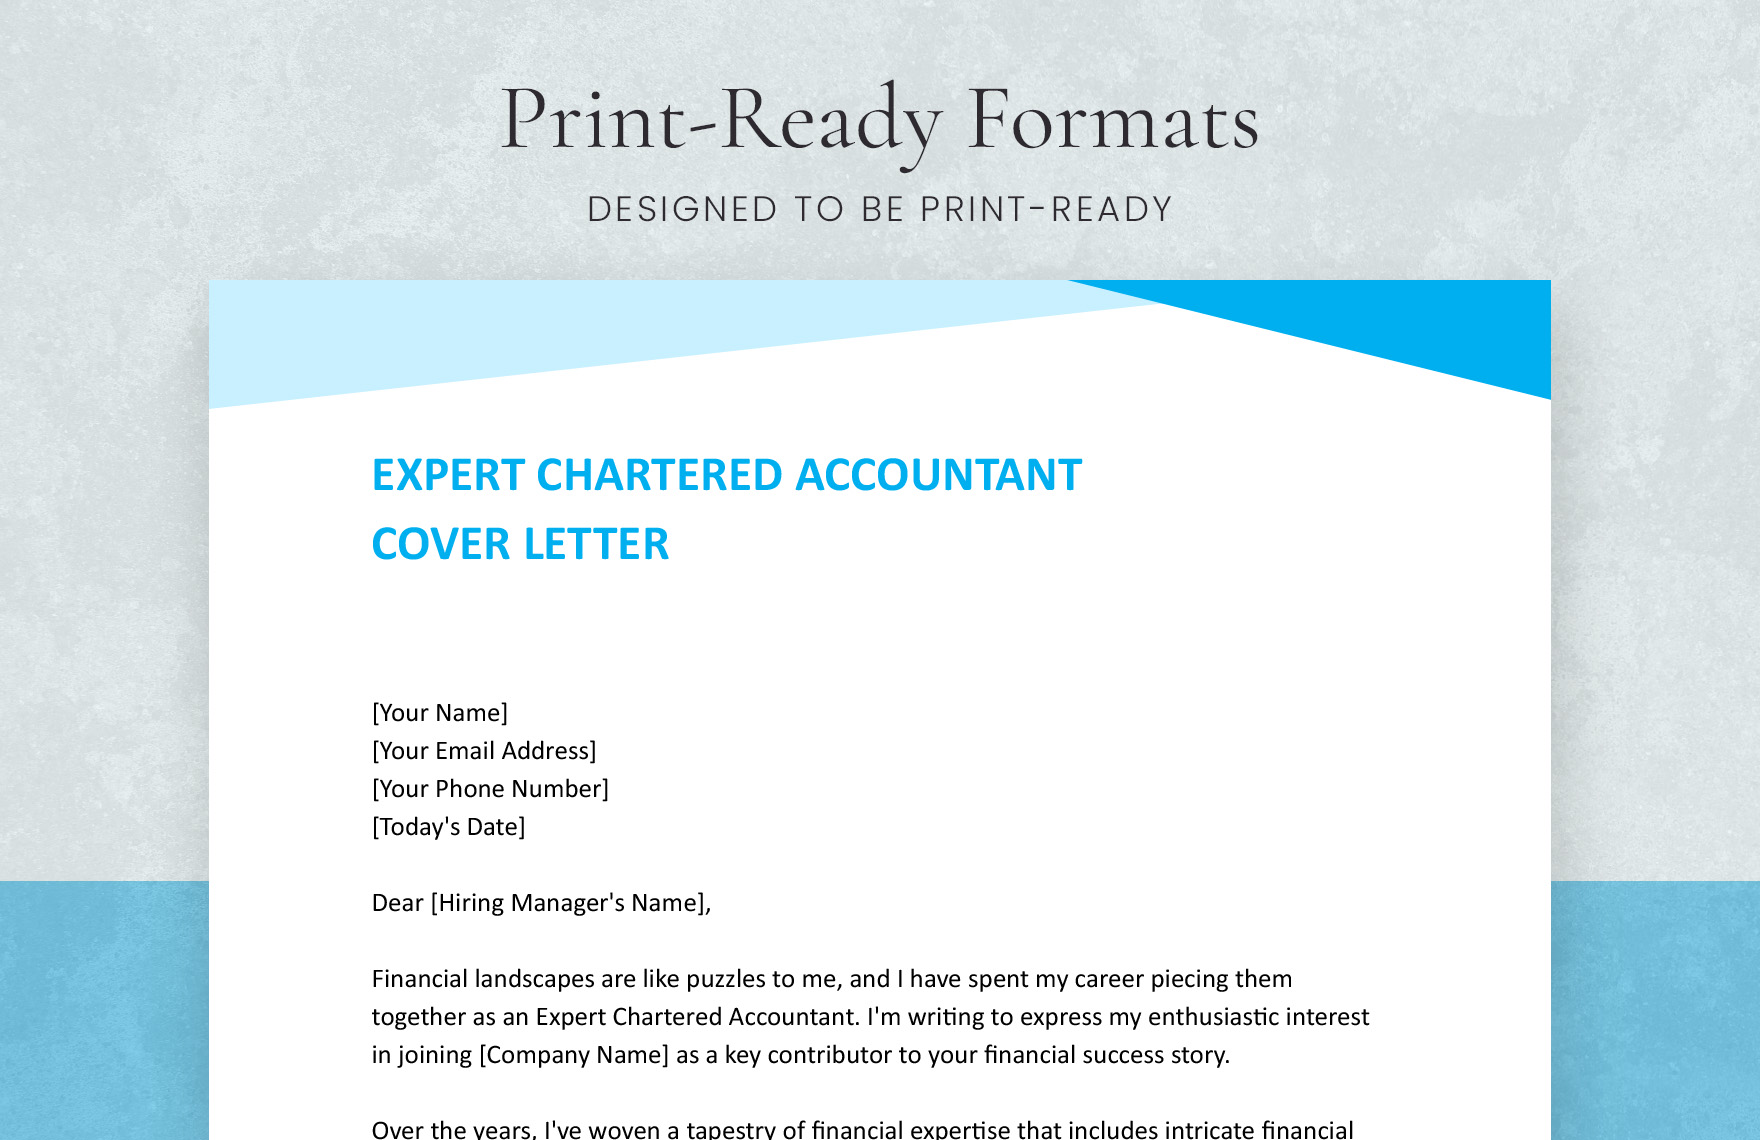 Expert Chartered Accountant Cover Letter